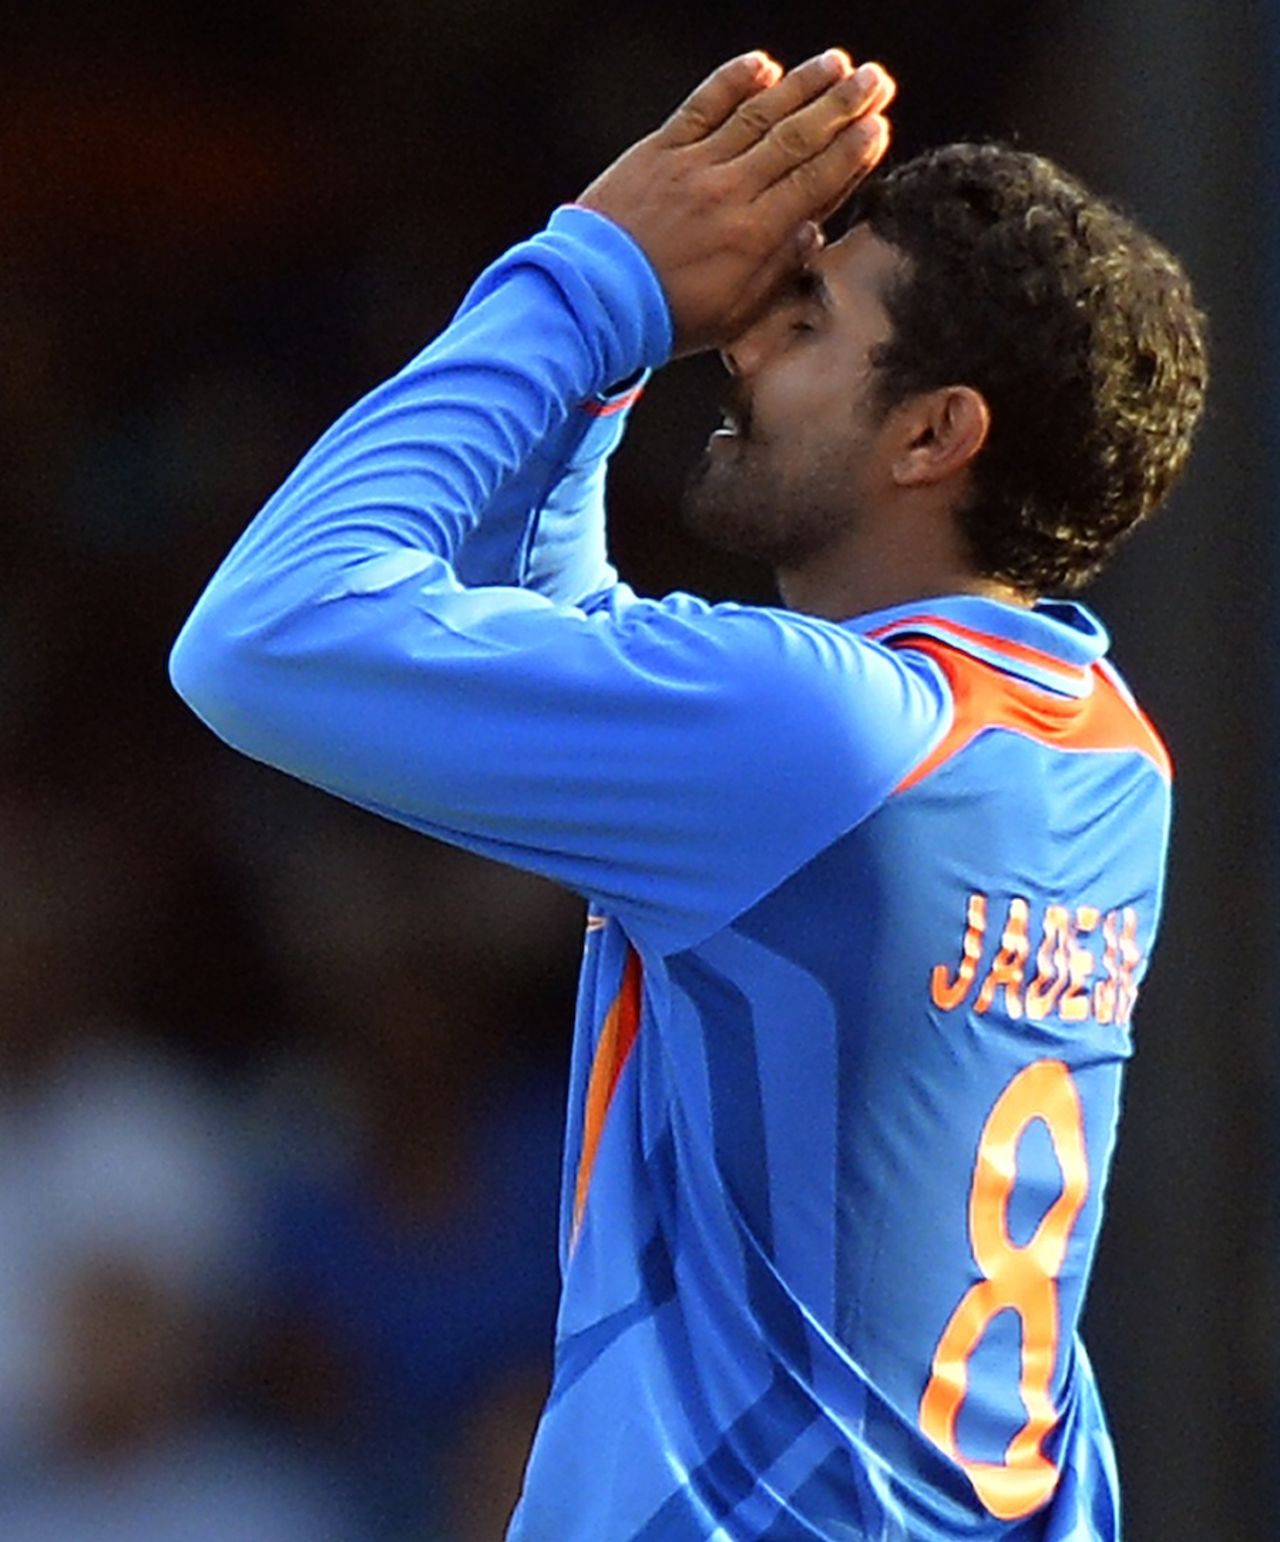 Ravindra Jadeja expresses relief after picking up the last two wickets, West Indies v India, West Indies tri-series, Port of Spain, July 5, 2013